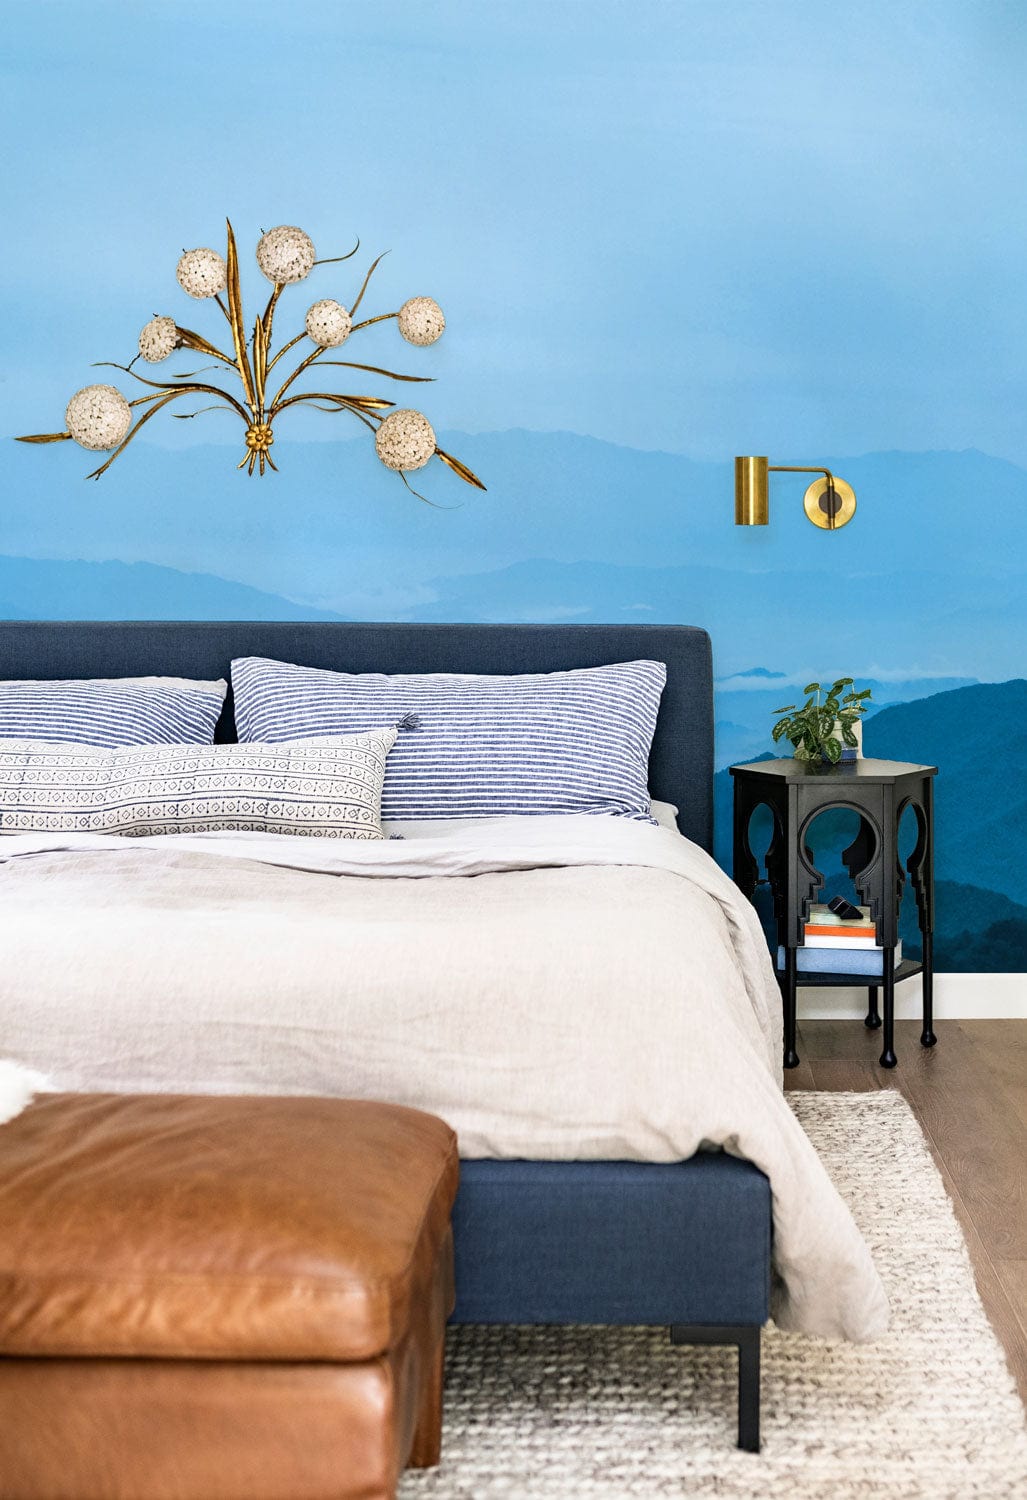 Wallpaper mural with a blue misty hillstops scene, ideal for use as bedroom decor